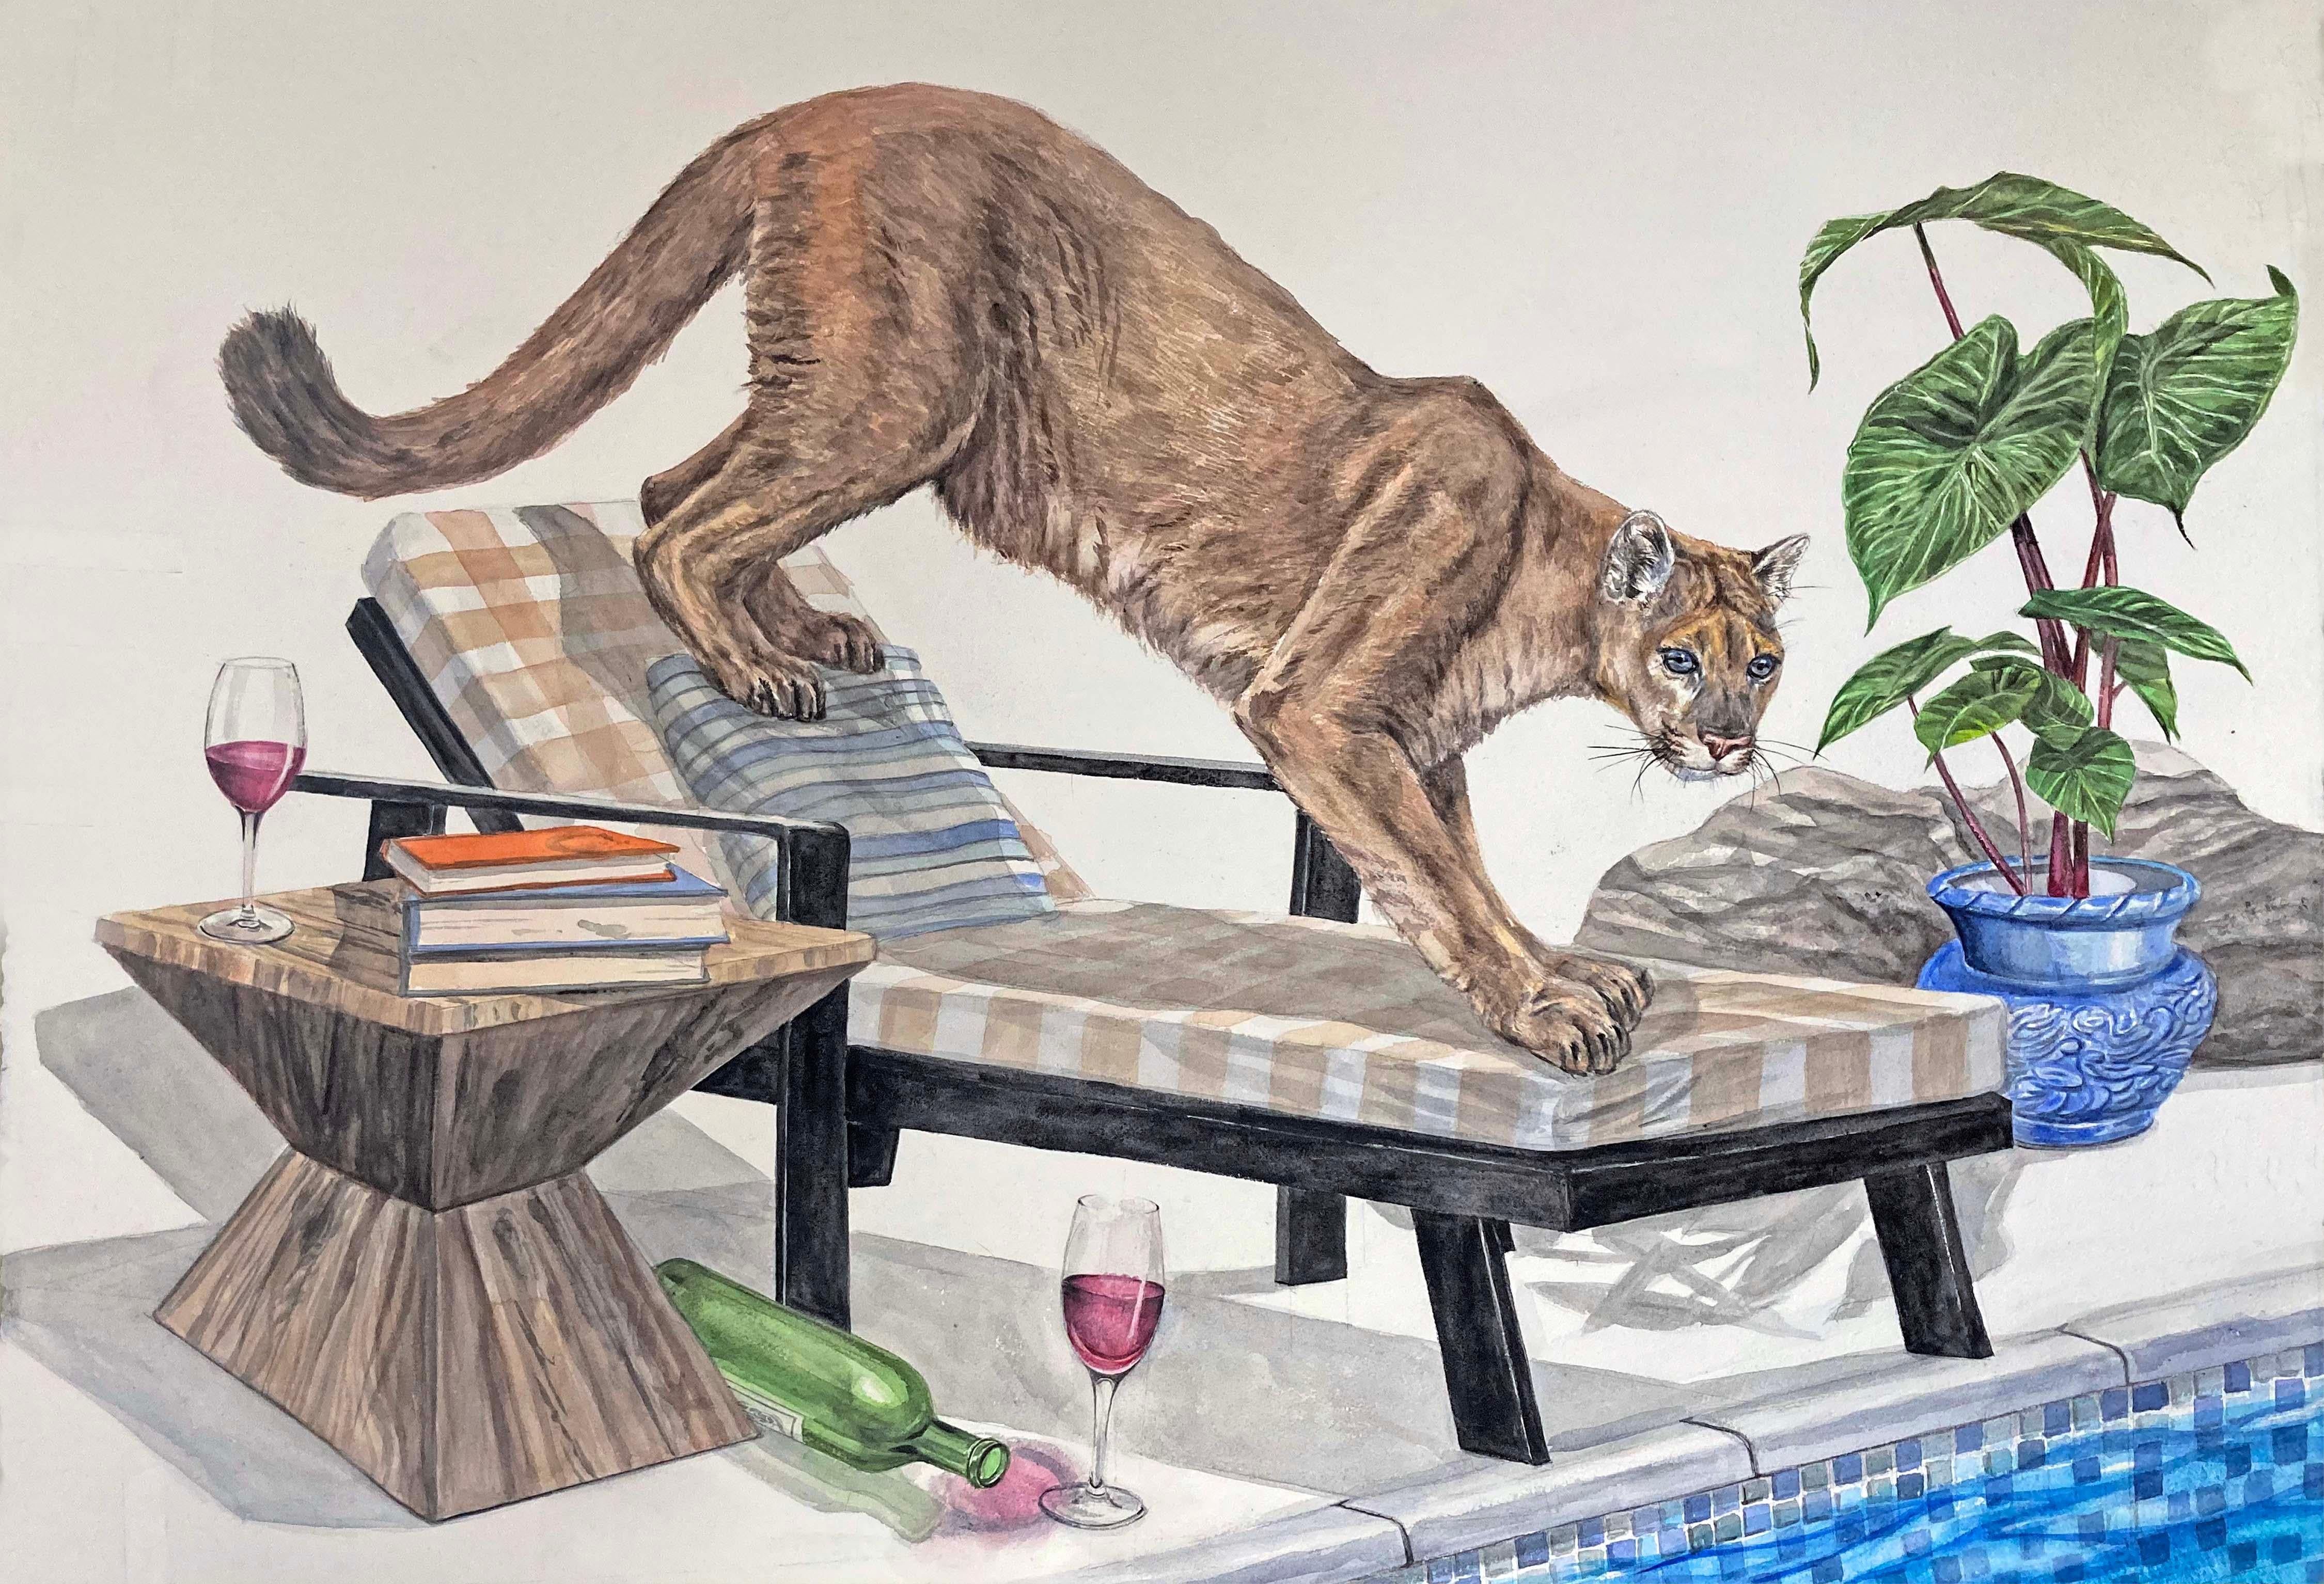 "The Visit" Cougar at Poolside, Contemporary Surrealist Painting